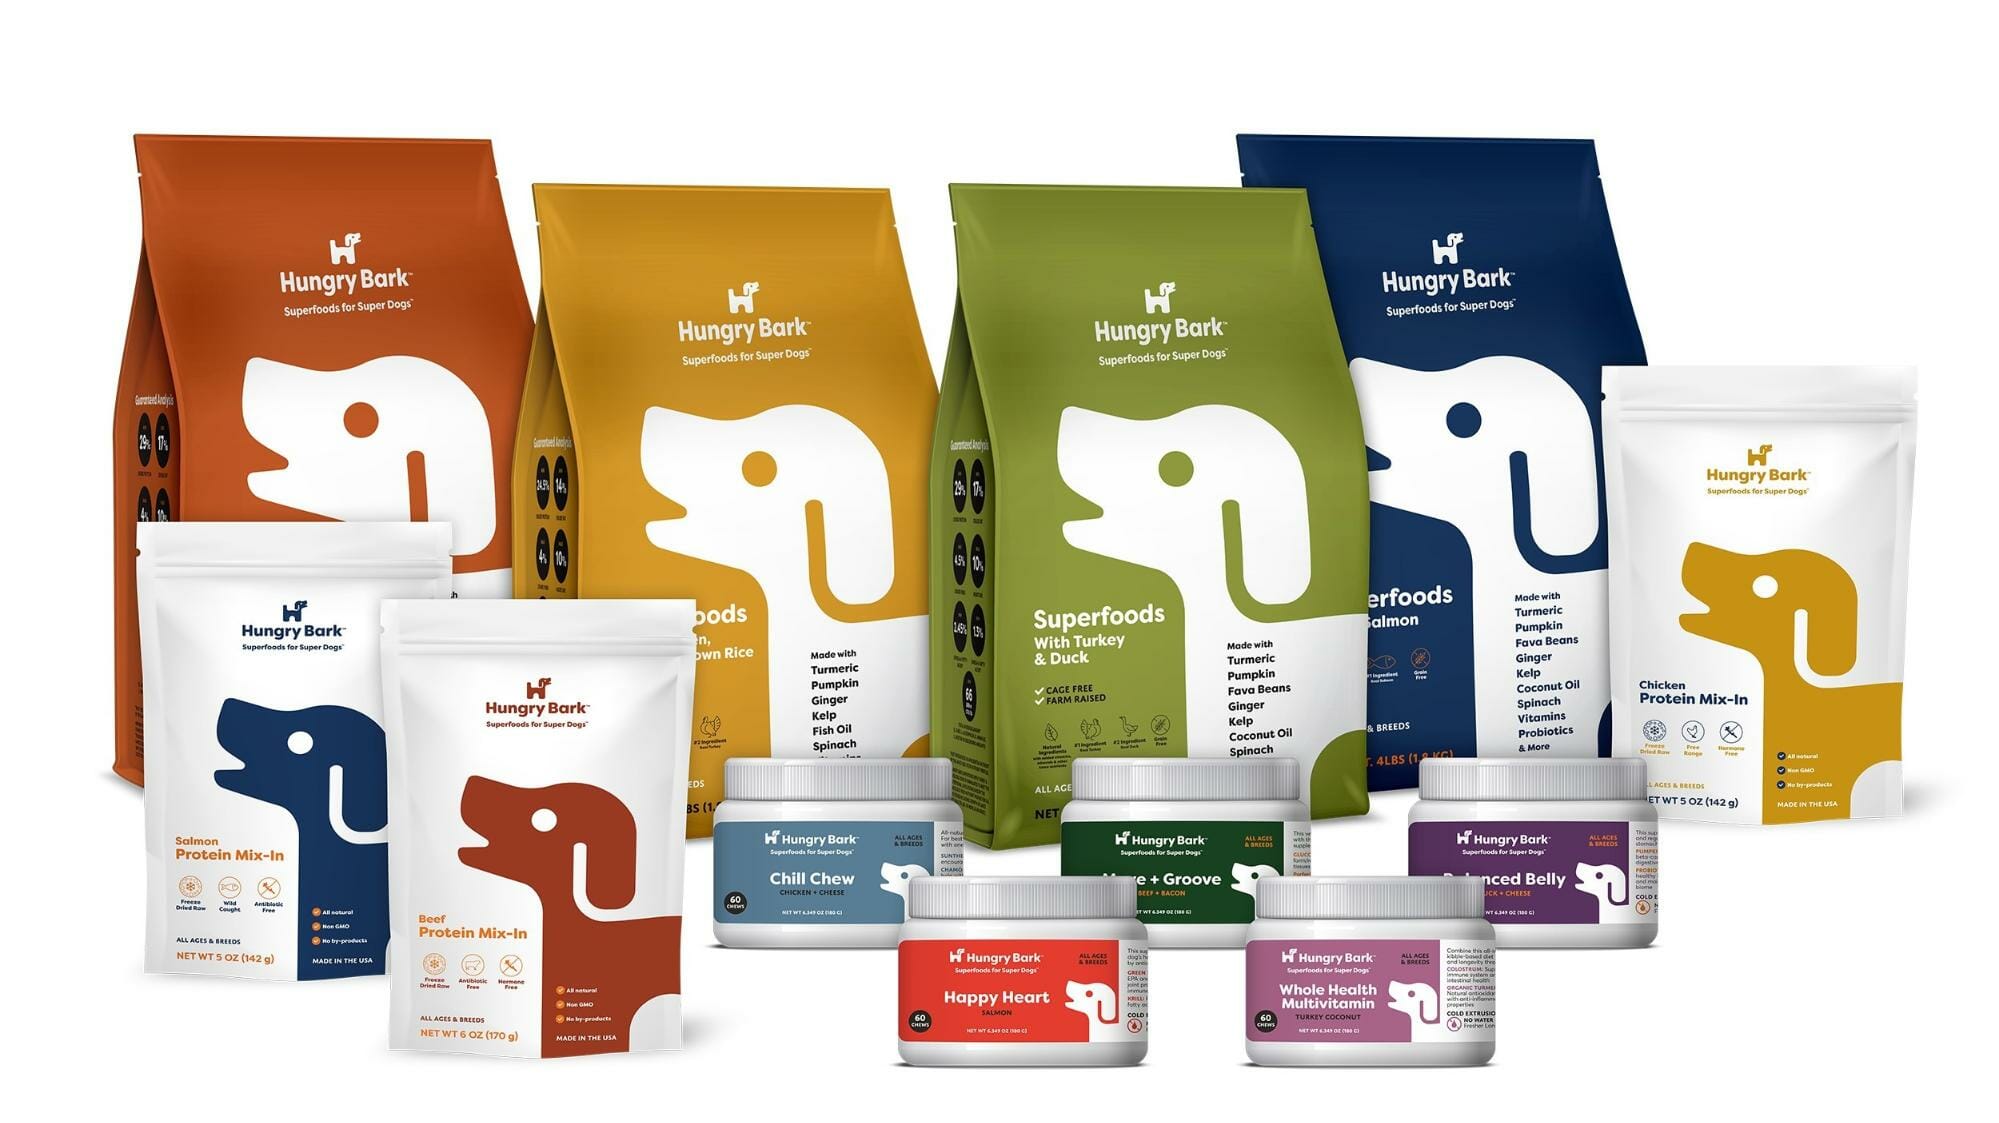 hungry bark product line